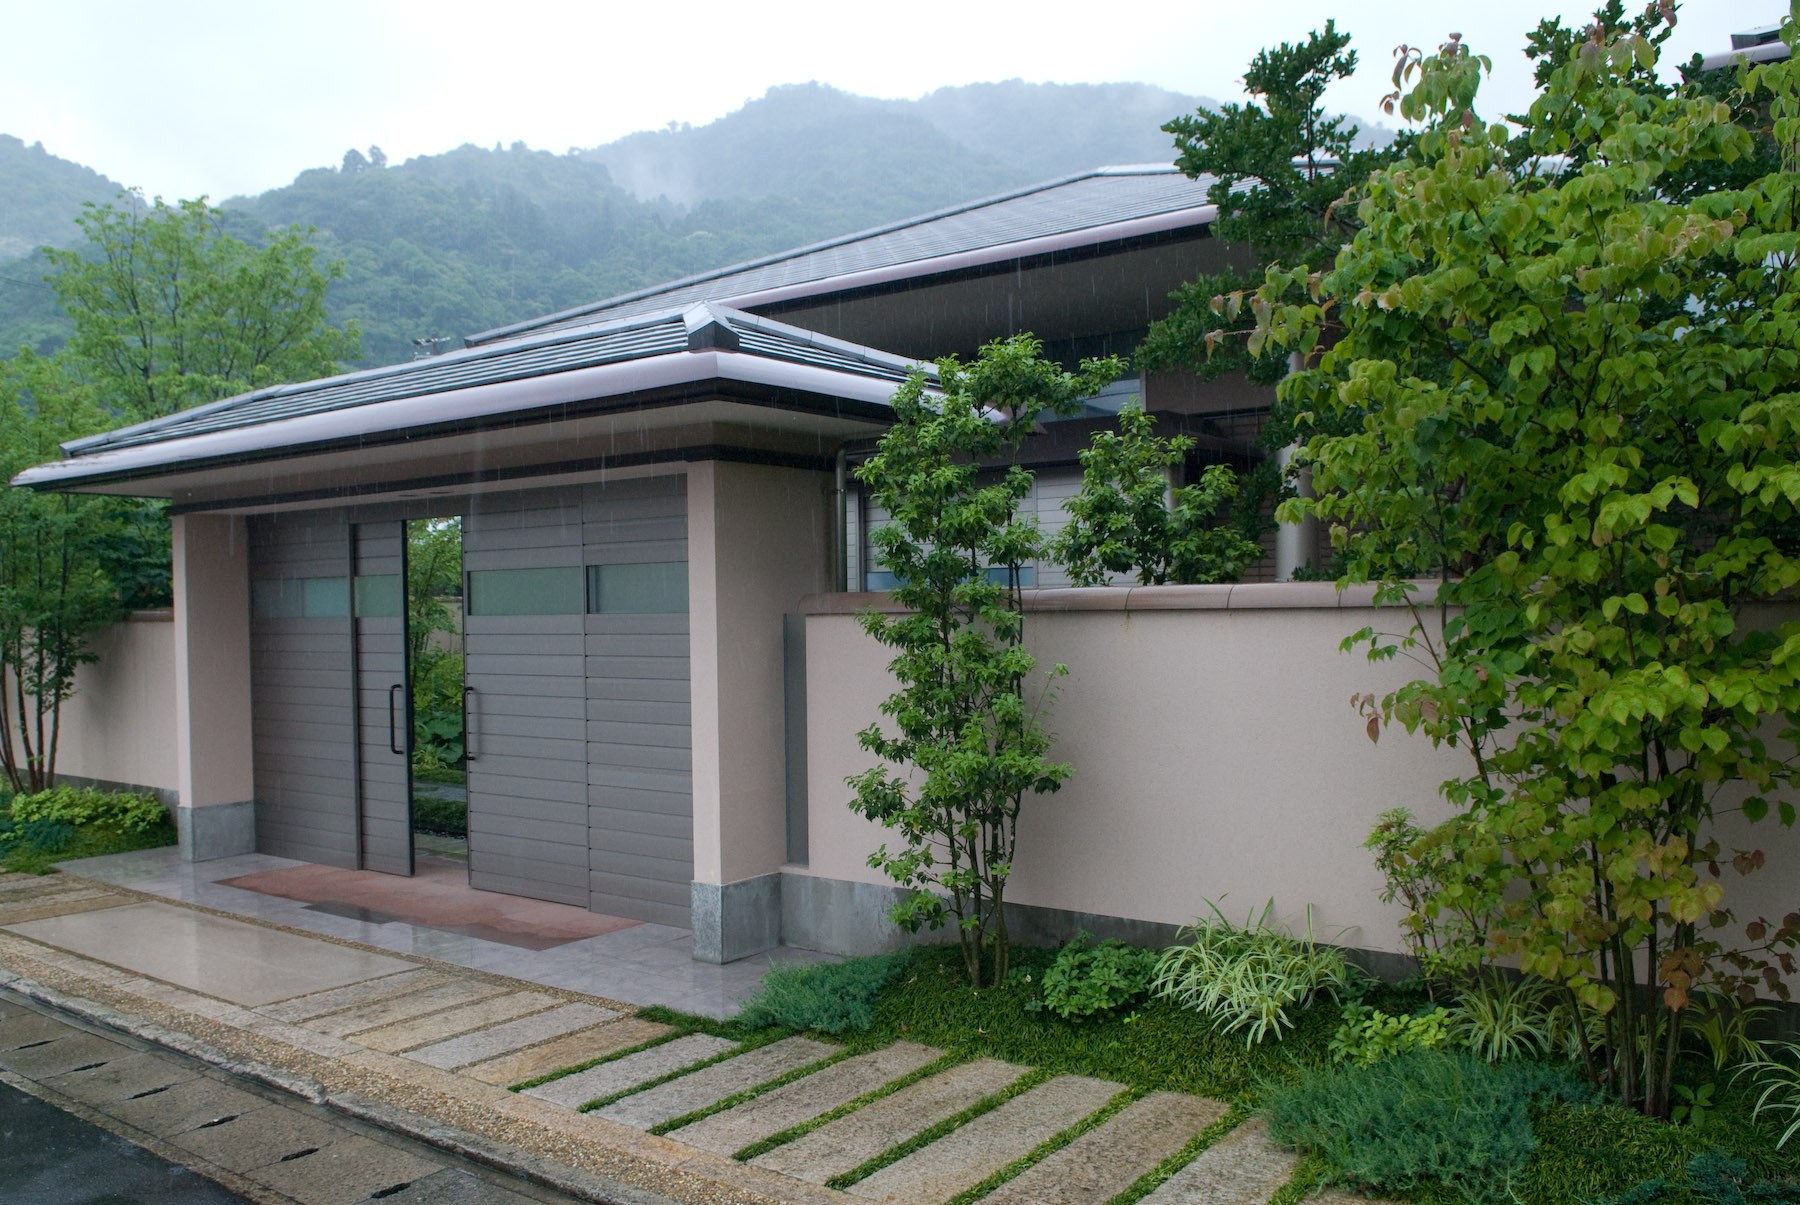 Japanese House Design A Trendy Option Of Living Space focus for Japanese House Design With Garden Room Inside